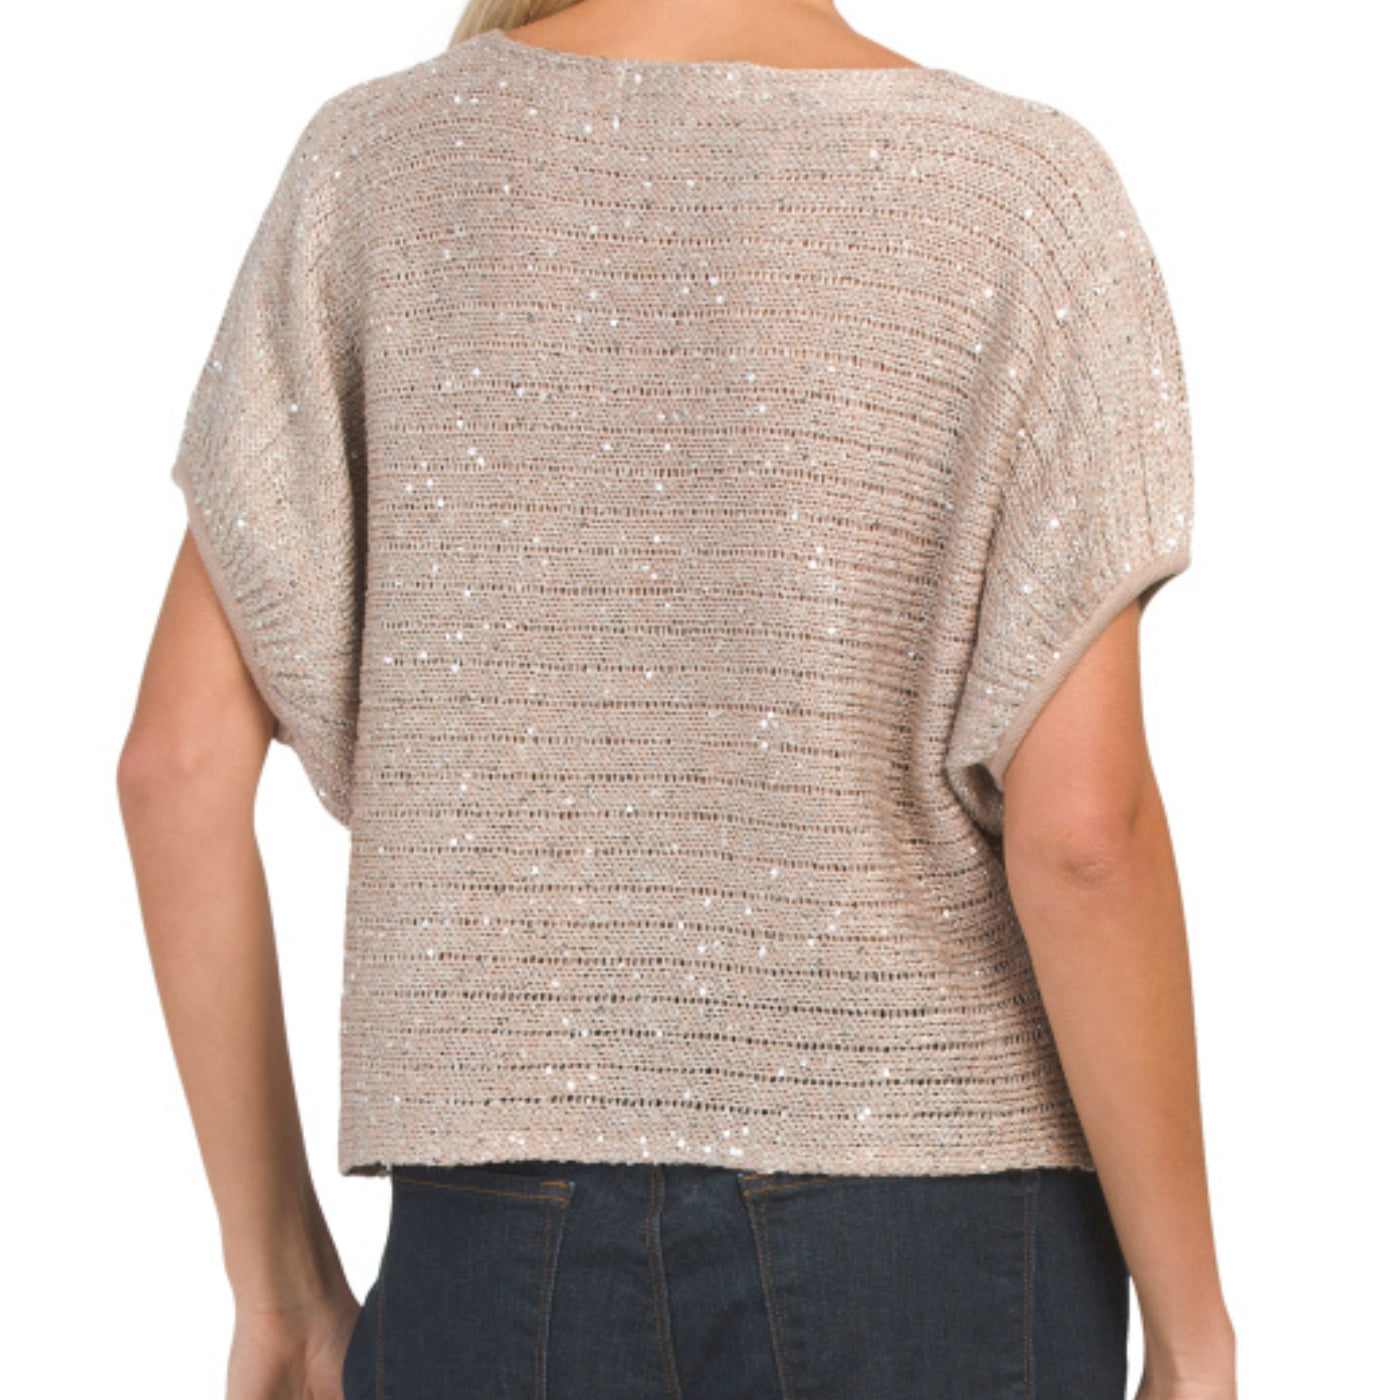 WDNY Dolman Sleeves Sequin Top